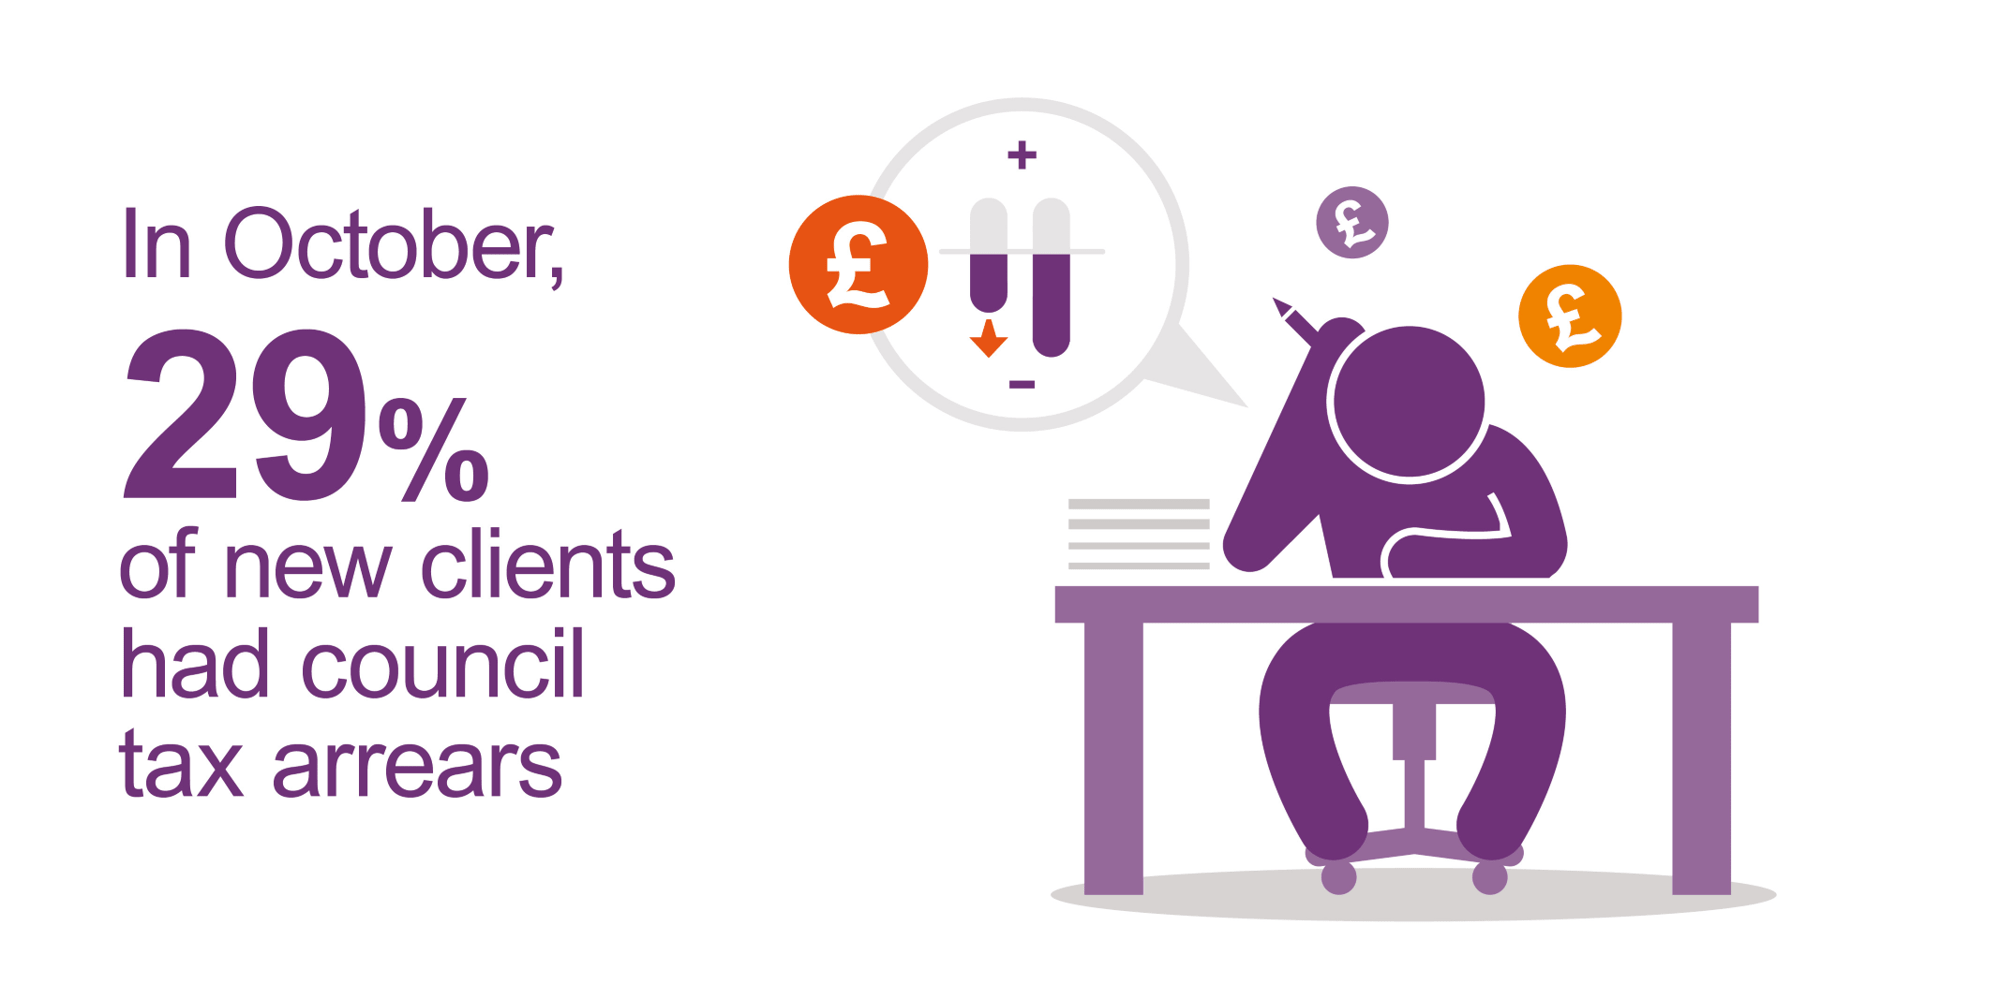 in October, 29% of new clients had council tax arrears